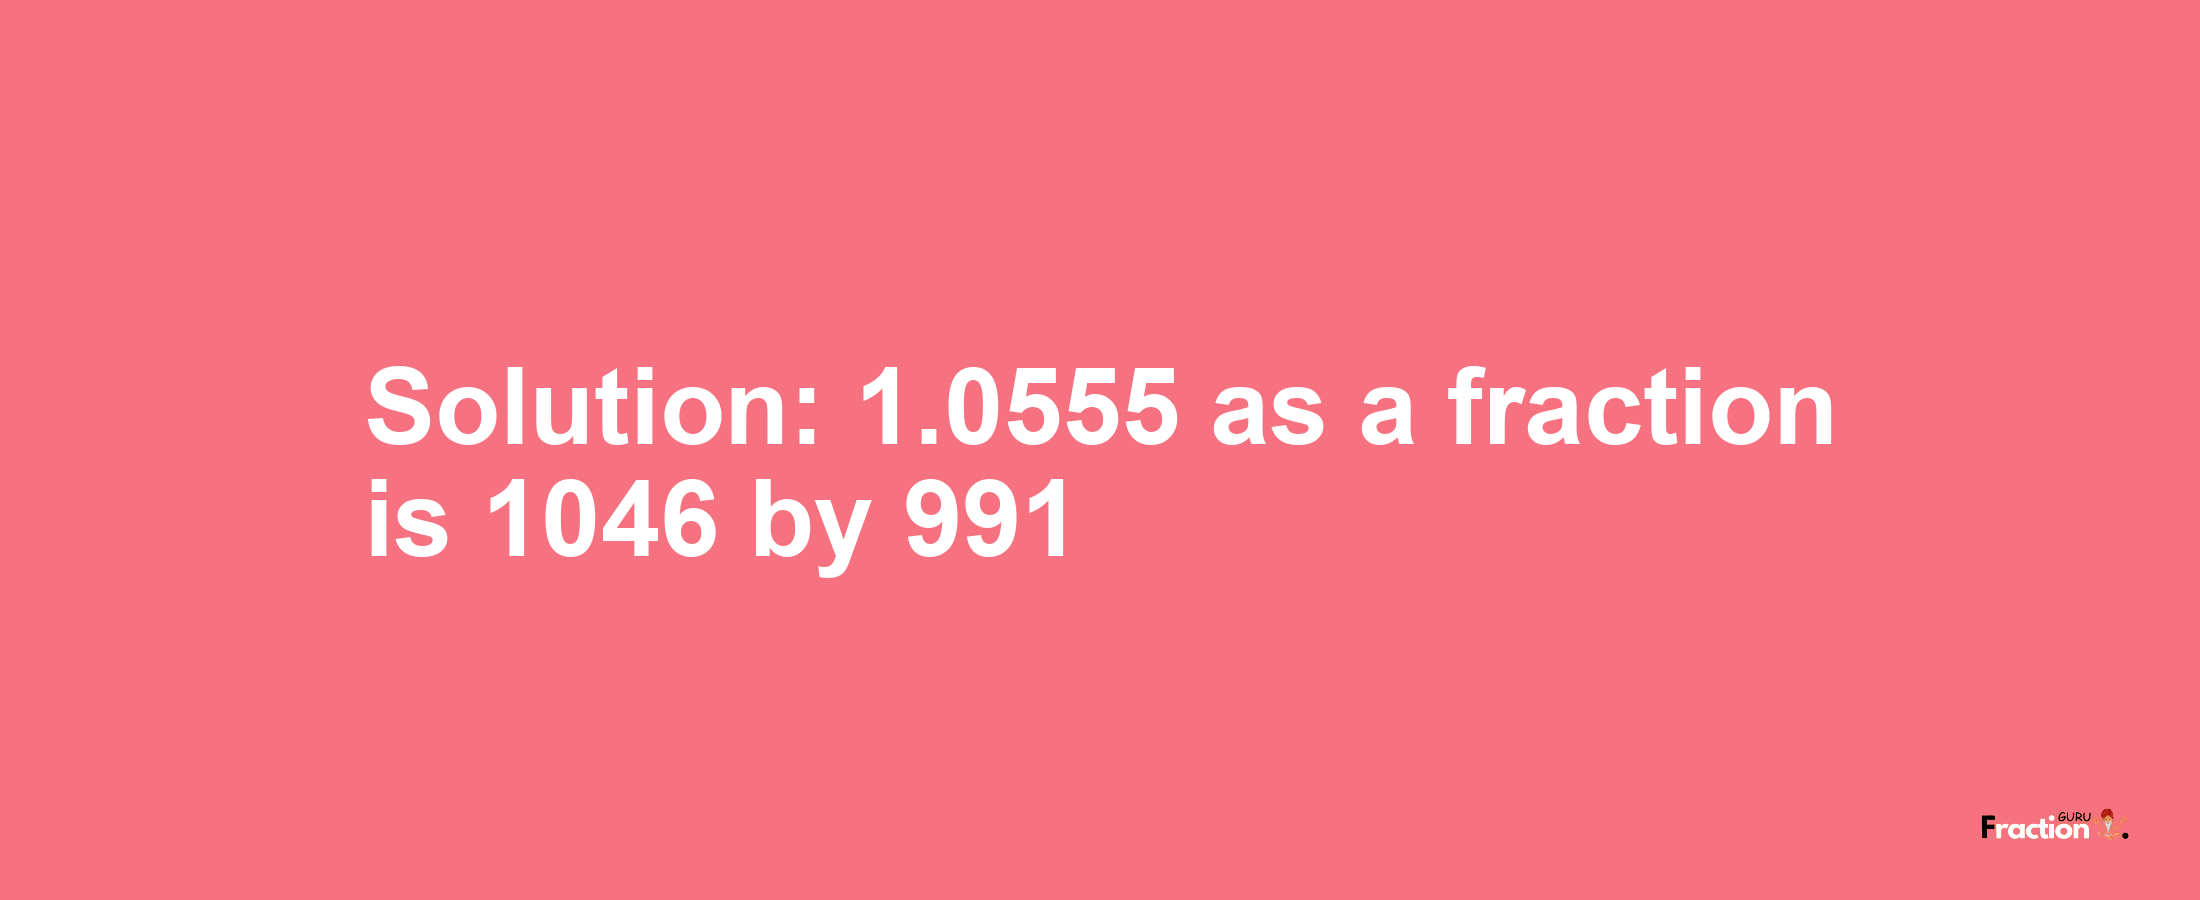 Solution:1.0555 as a fraction is 1046/991